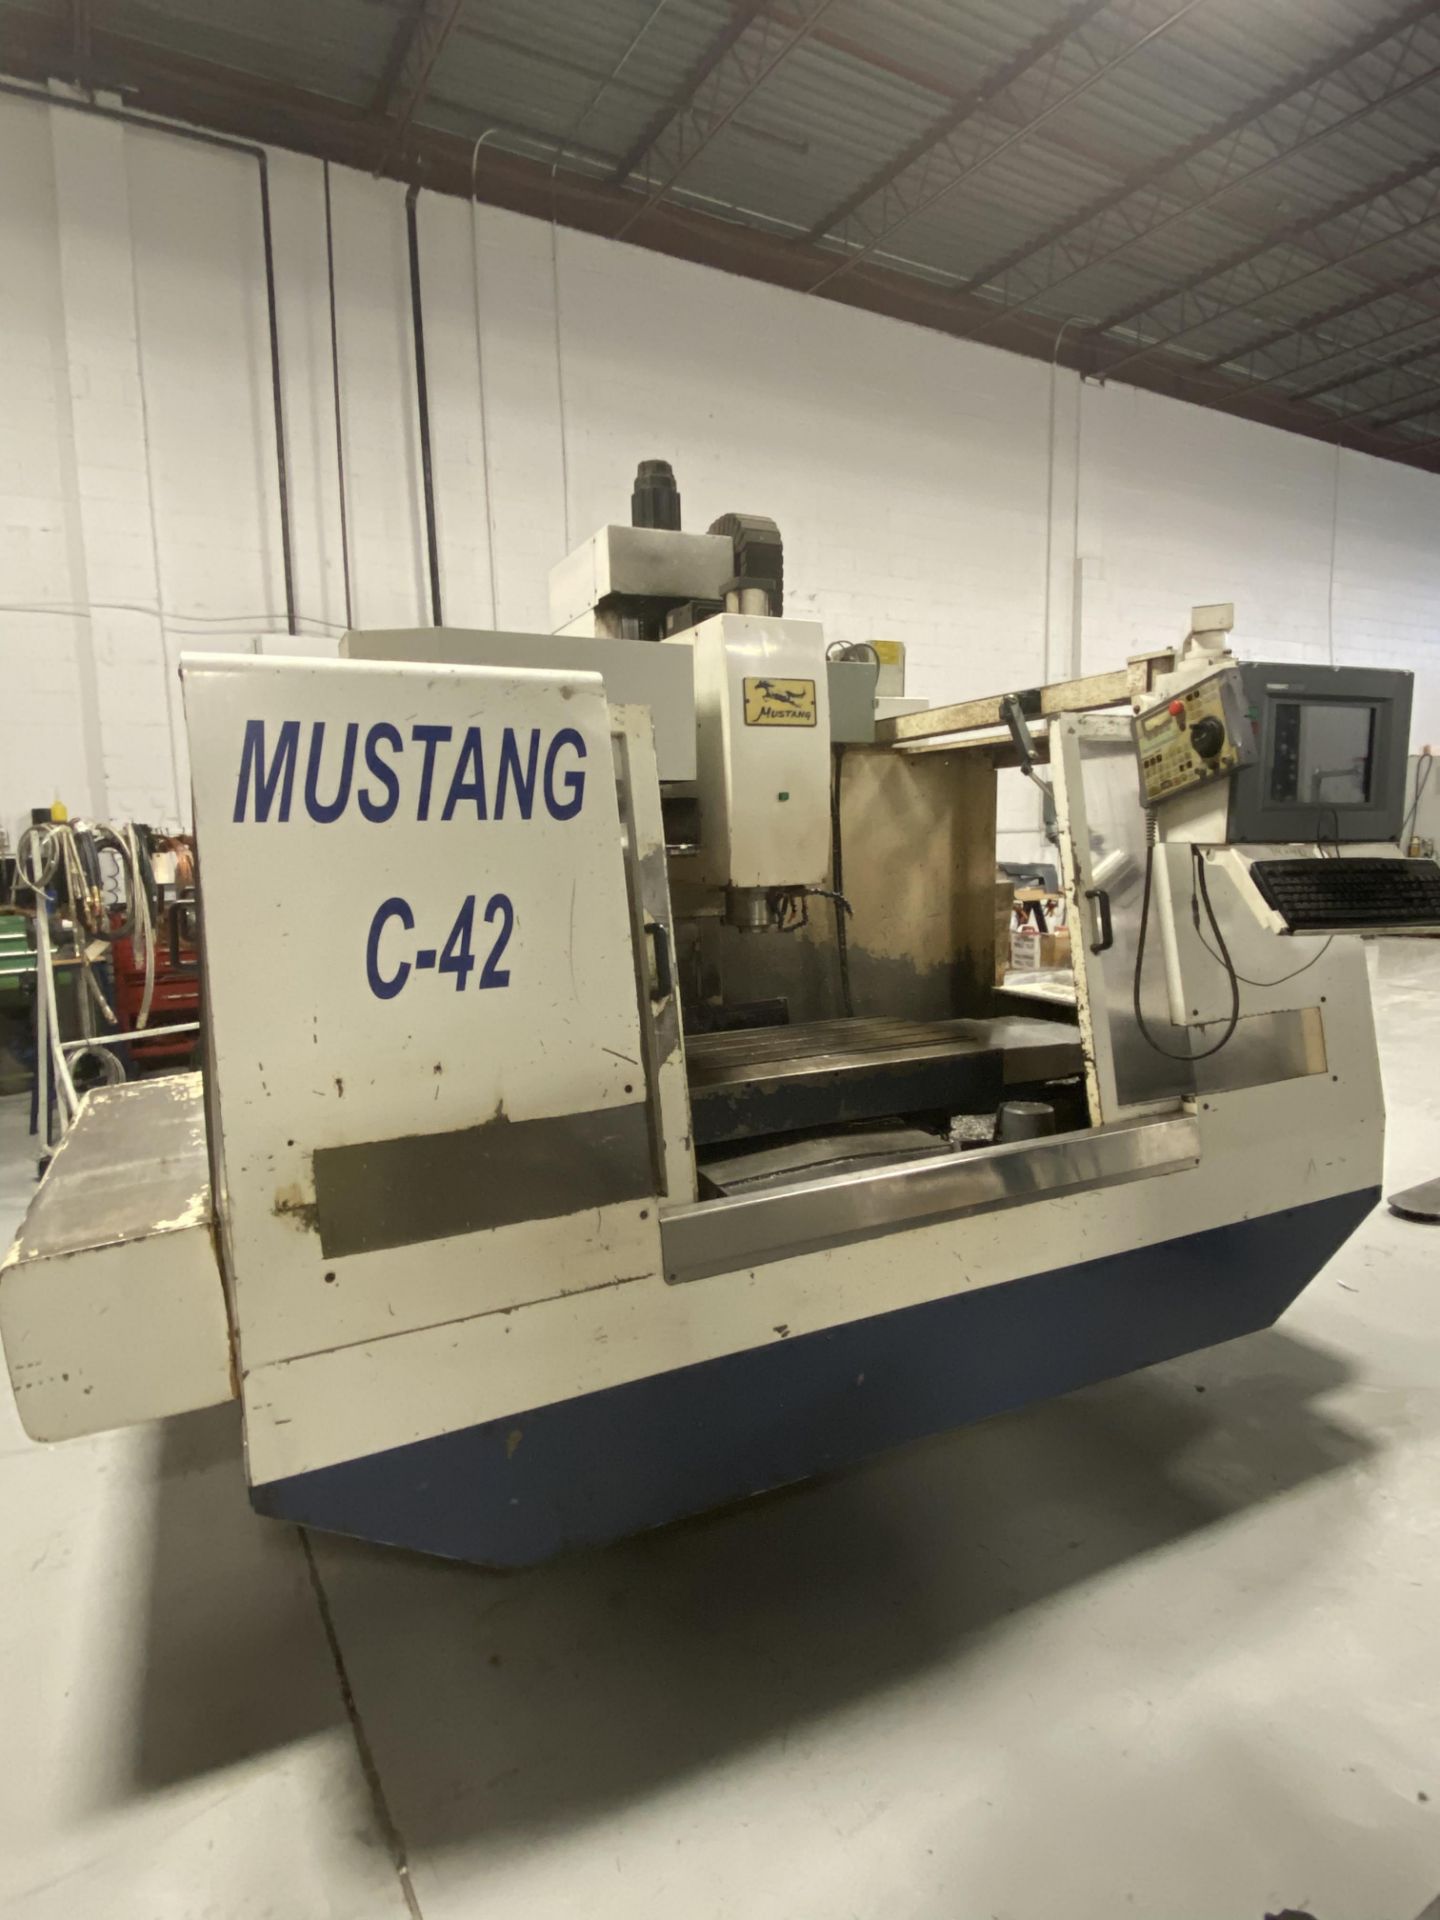 CNC MUSTANG C42 MILLING MACHINE, LOCATION, MONTREAL, QUEBEC - Image 7 of 7